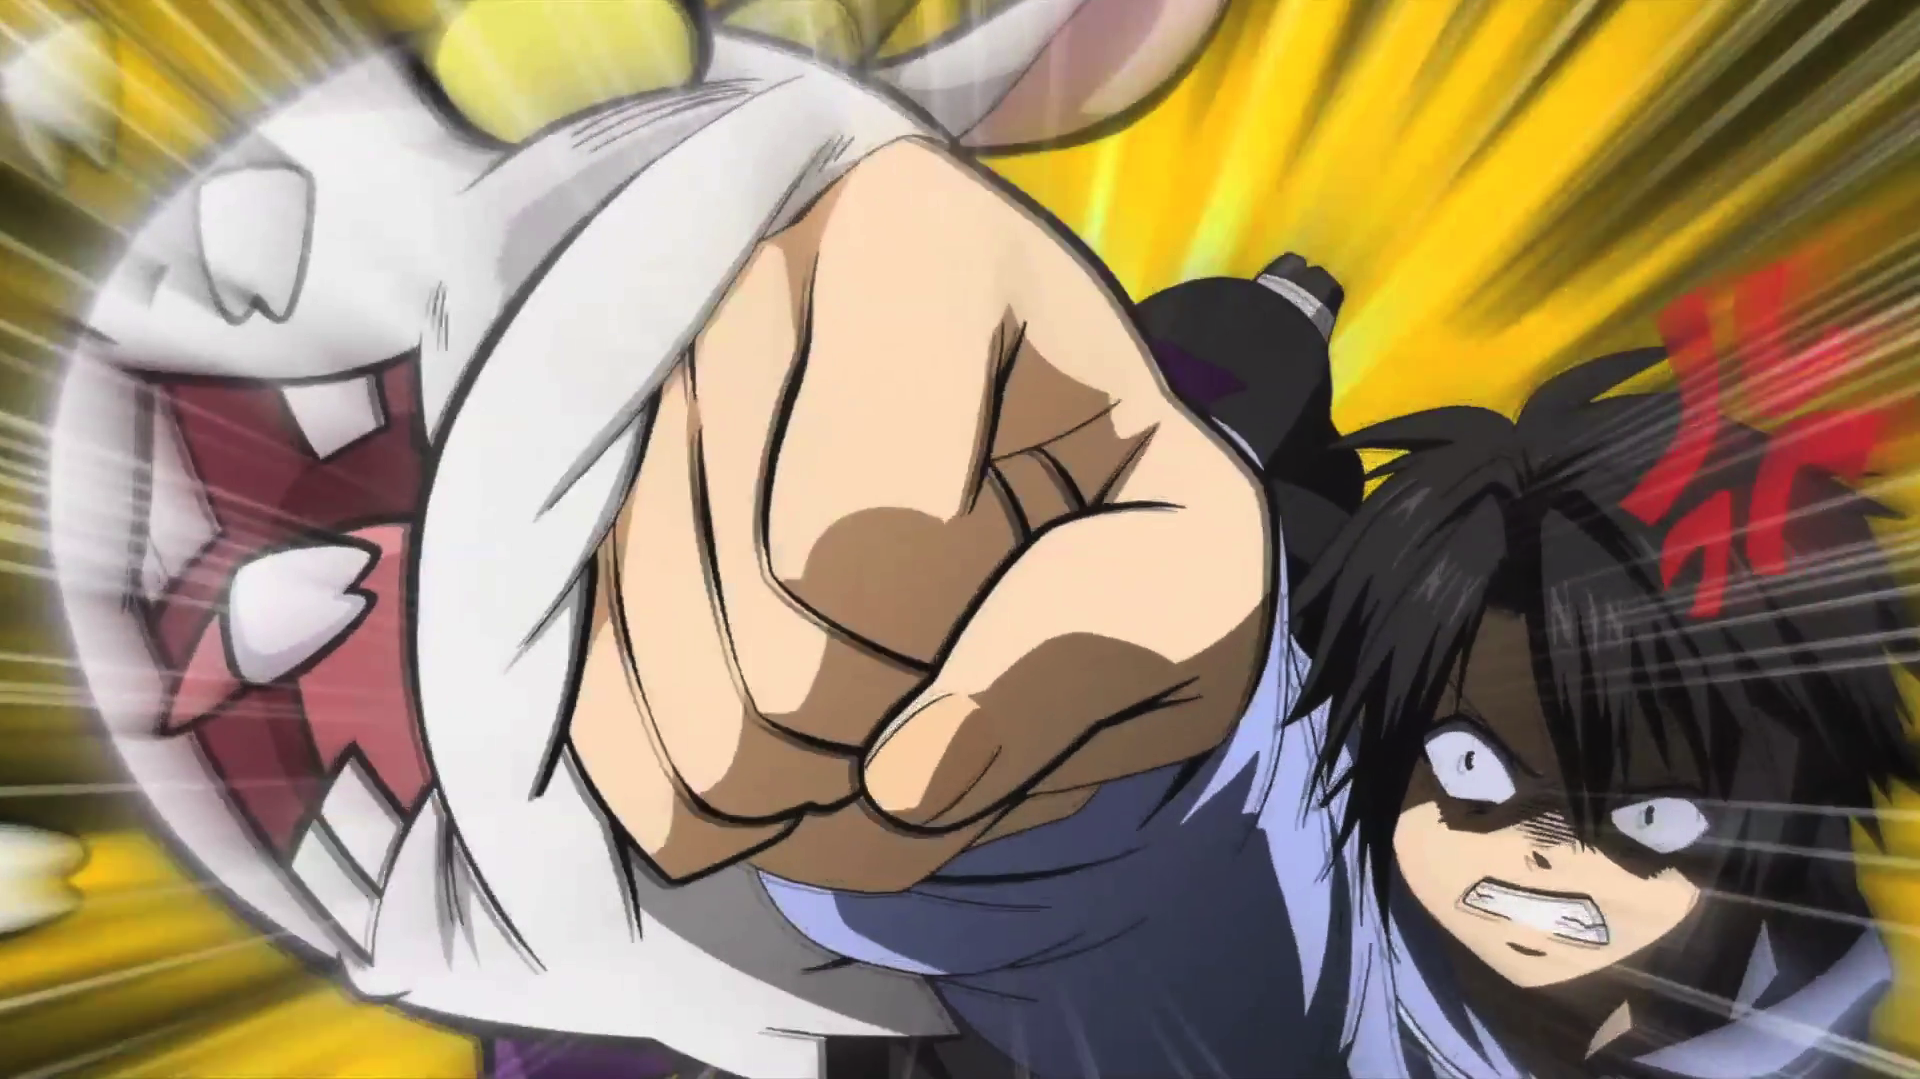 Why do I even try — Anime has the best punches